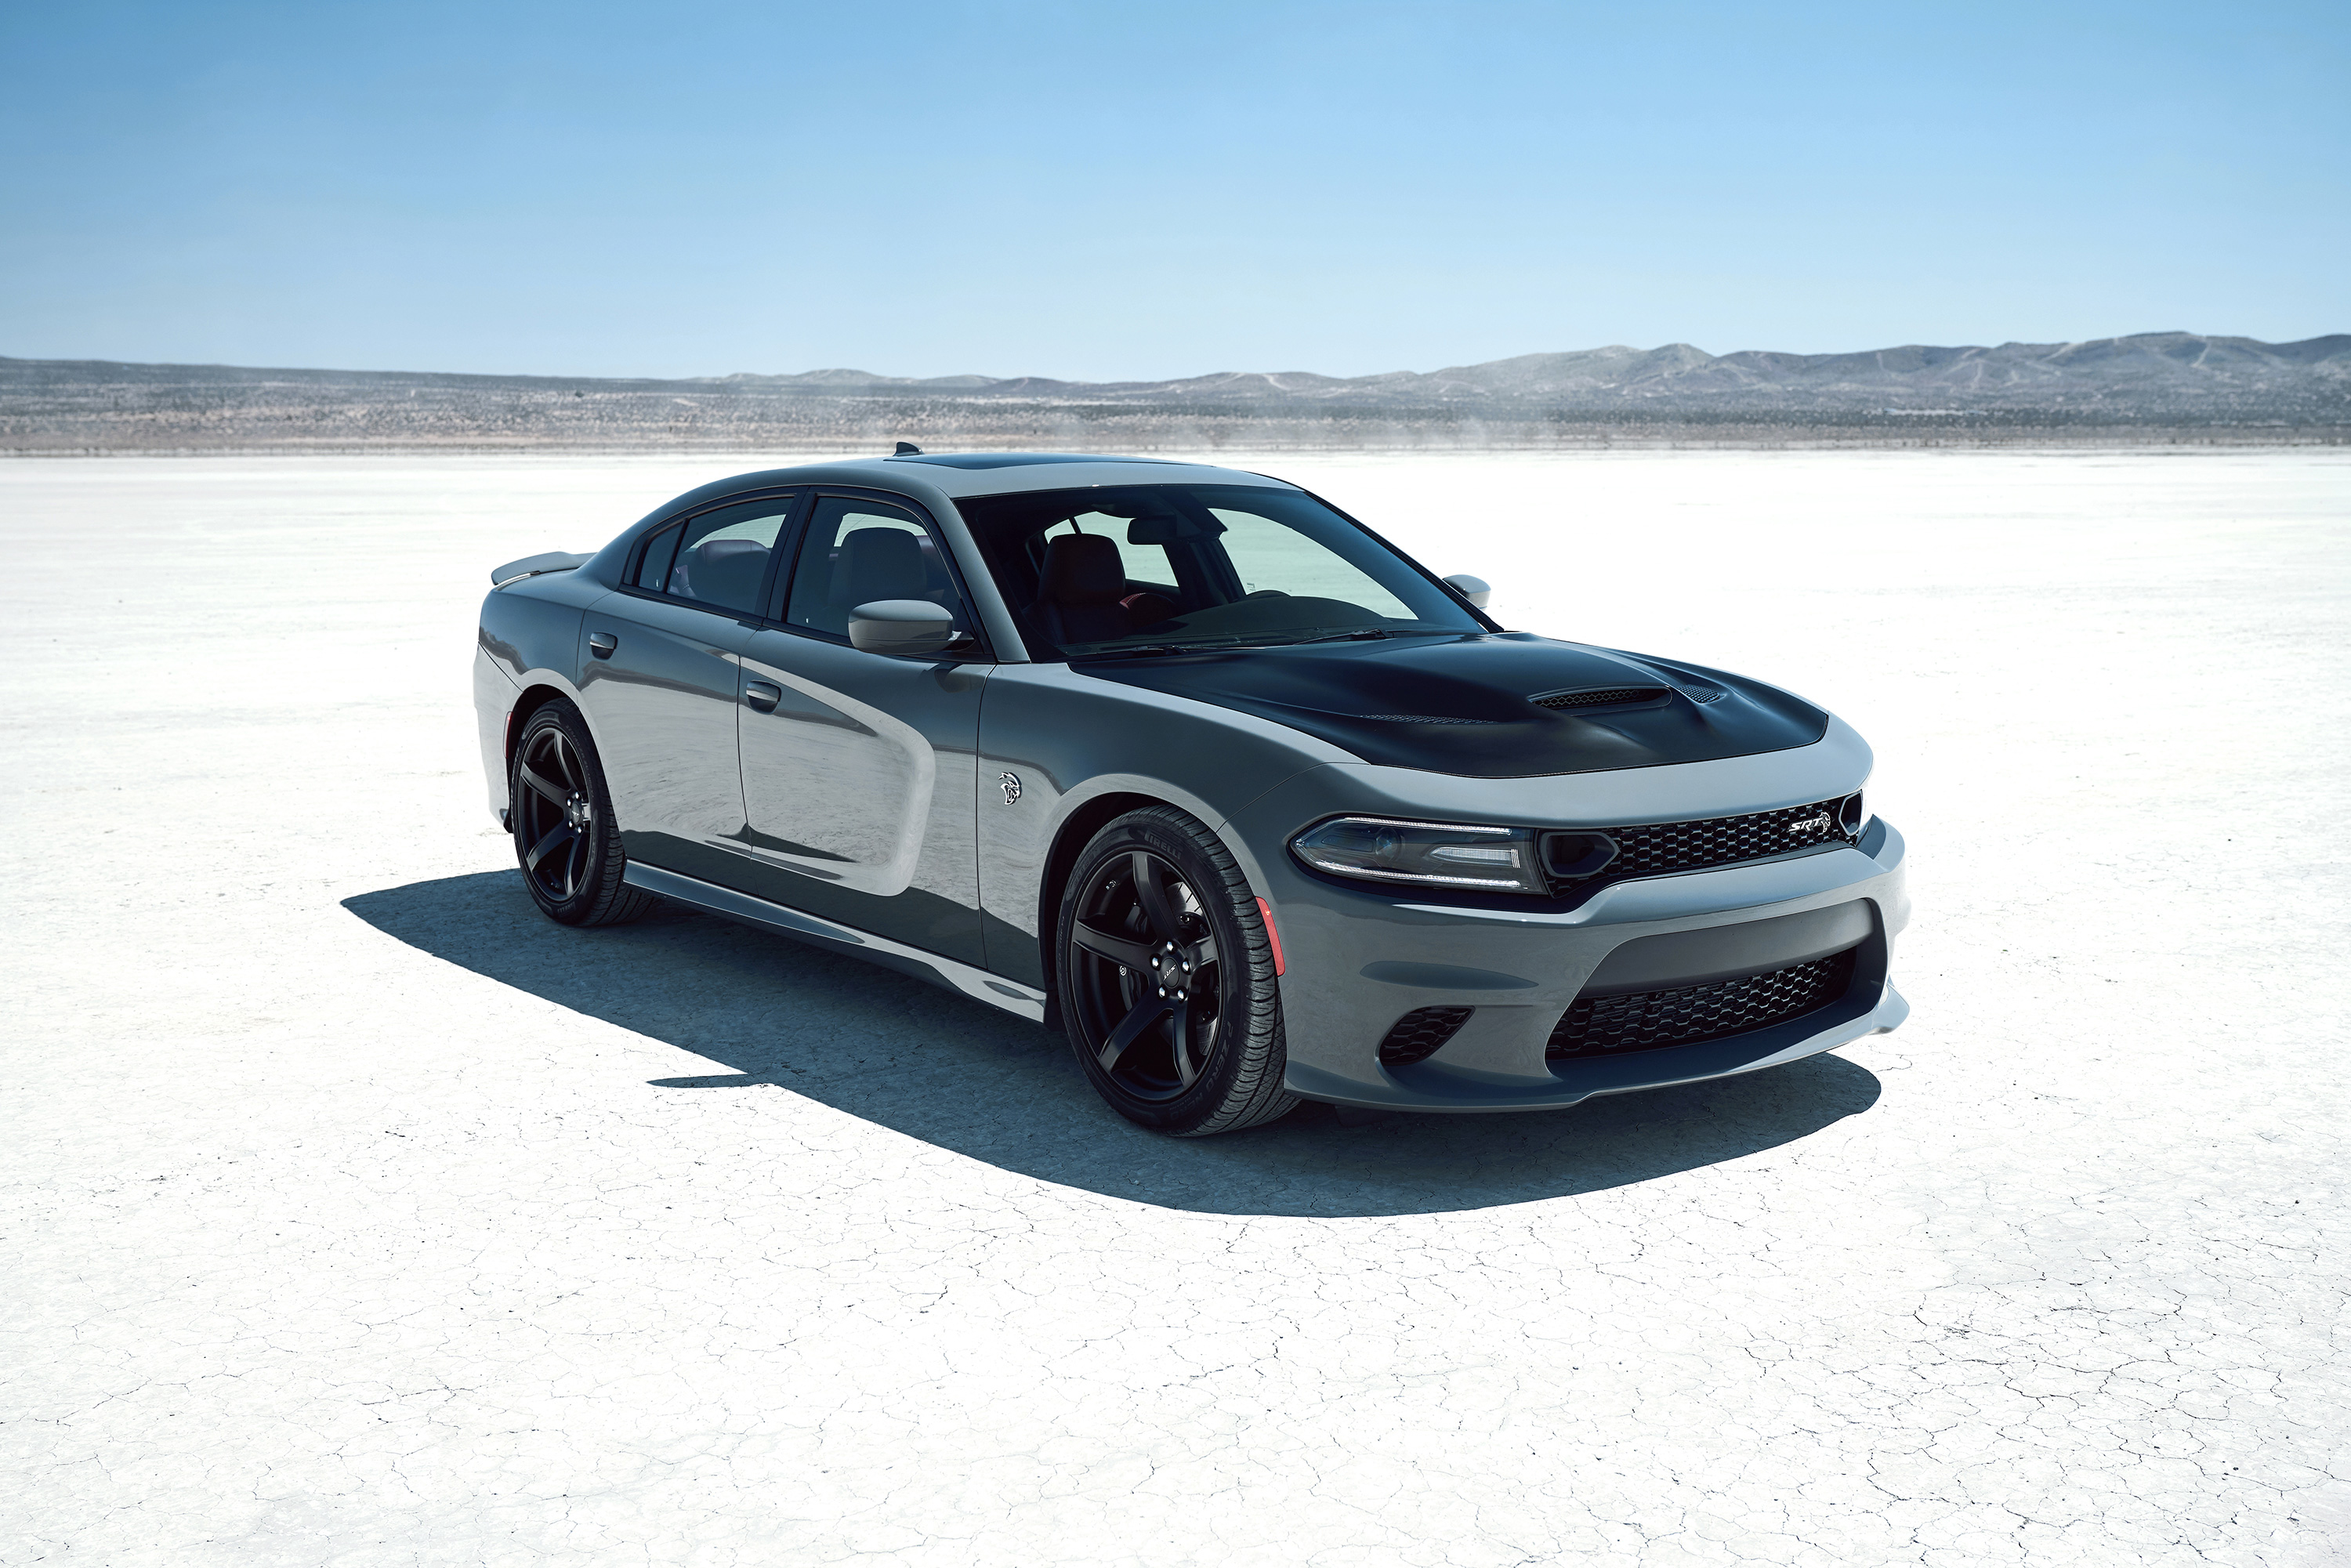 Dodge Charger SRT Hellcat 2018, HD Cars, 4k Wallpapers, Images